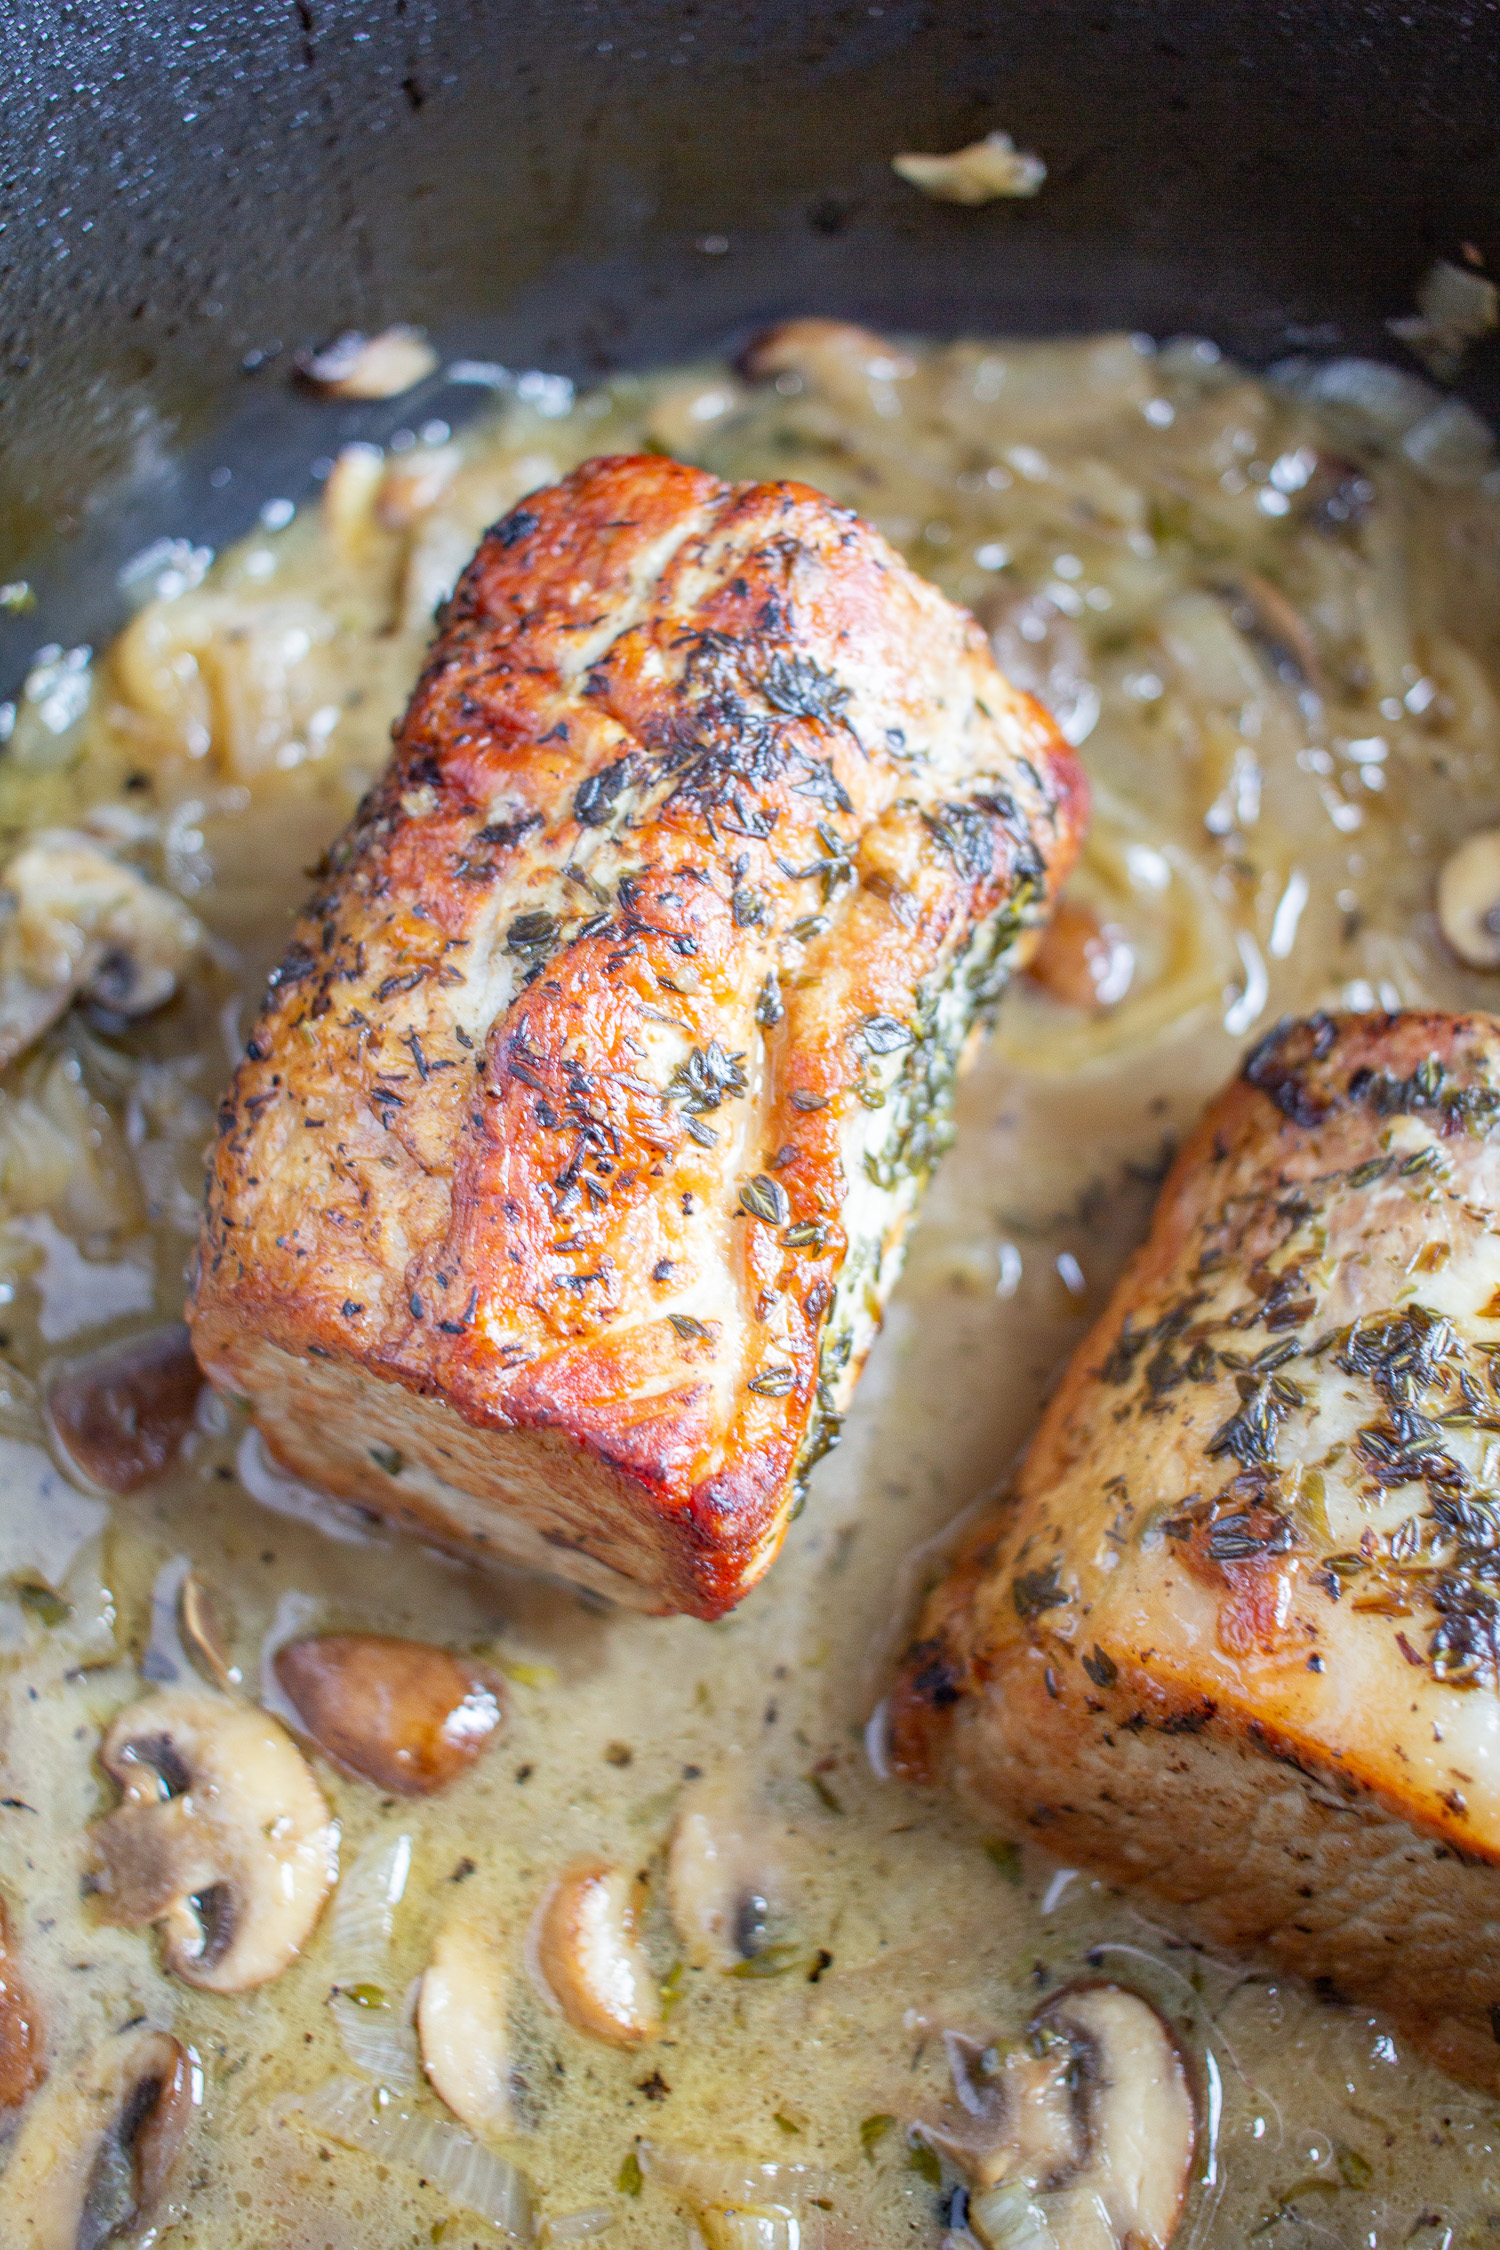 Roasted Pork Loin with Mushrooms and Shallots | An Elegant Dinner